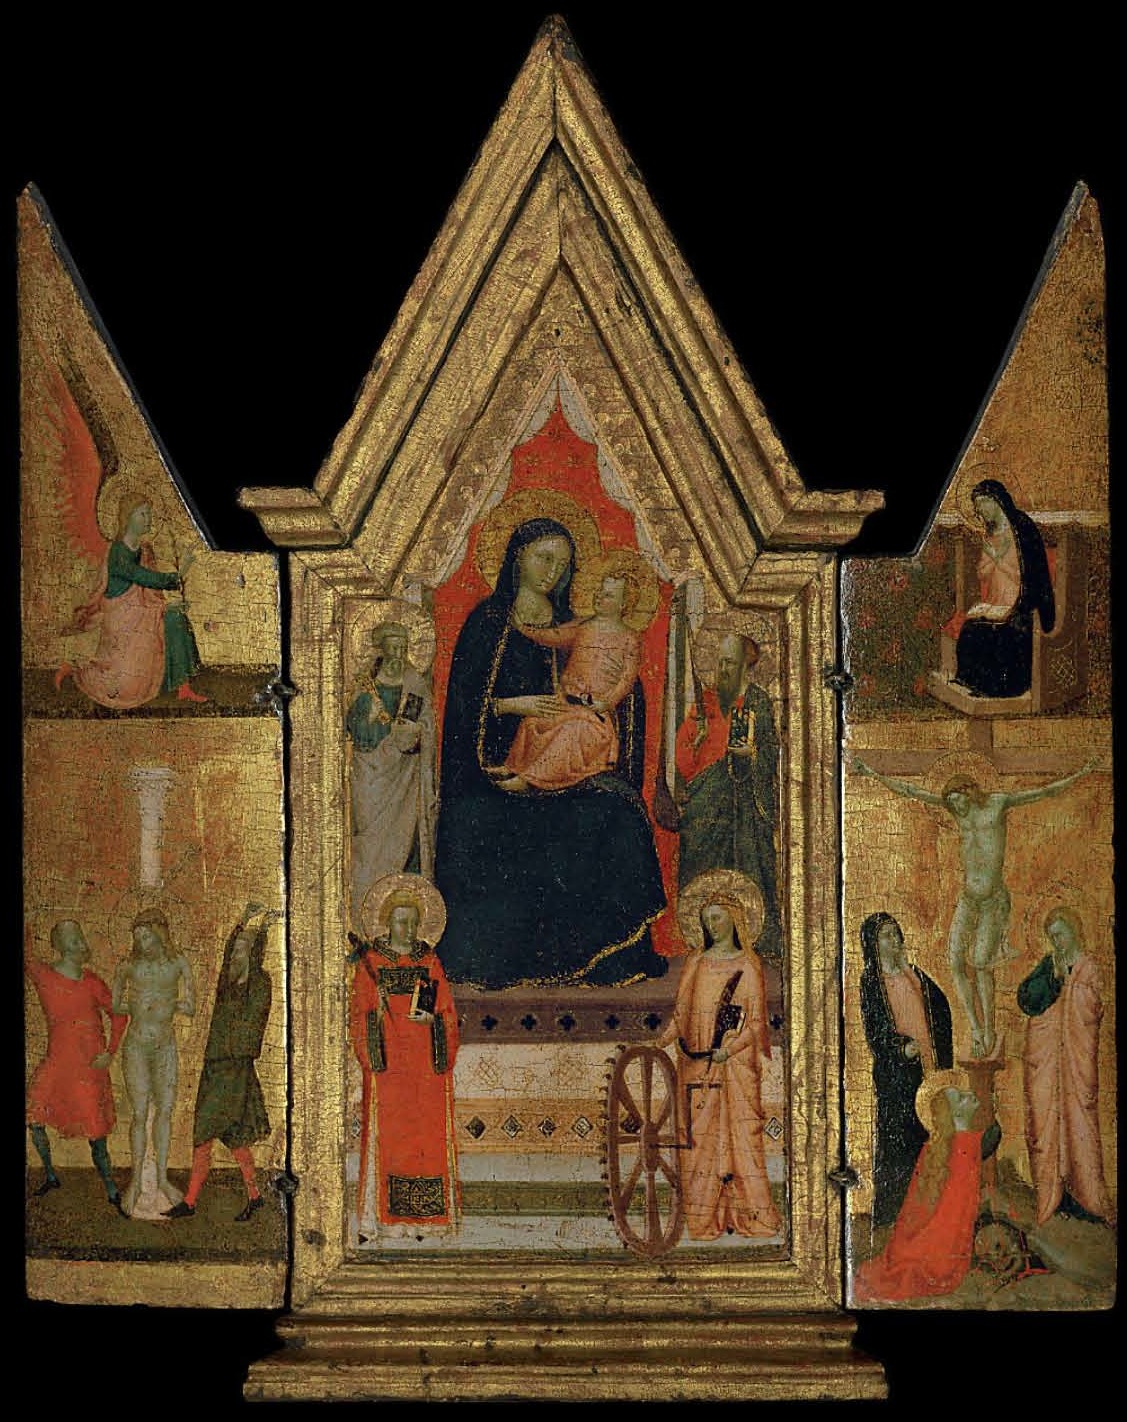 Lot 17. The Master of the Dominican Effigies (Florence, c. 1310-1350) A triptych: central panel: The Madonna and Child Enthroned, with Saints Peter, Paul, Catherine of Alexandria and another Saint; the wings: The Flagellation of Christ; and The Crucifixion, with The Annunciation tempera and gold on panel, in an integral tabernacle frame open: 23 x 18 7/8 in. (59 x 47.9 cm.); closed: 23 x 10 7/8 in. (59 x 27.7 cm.) Estimate: $200,000-300,000. Click on image to enlarge.